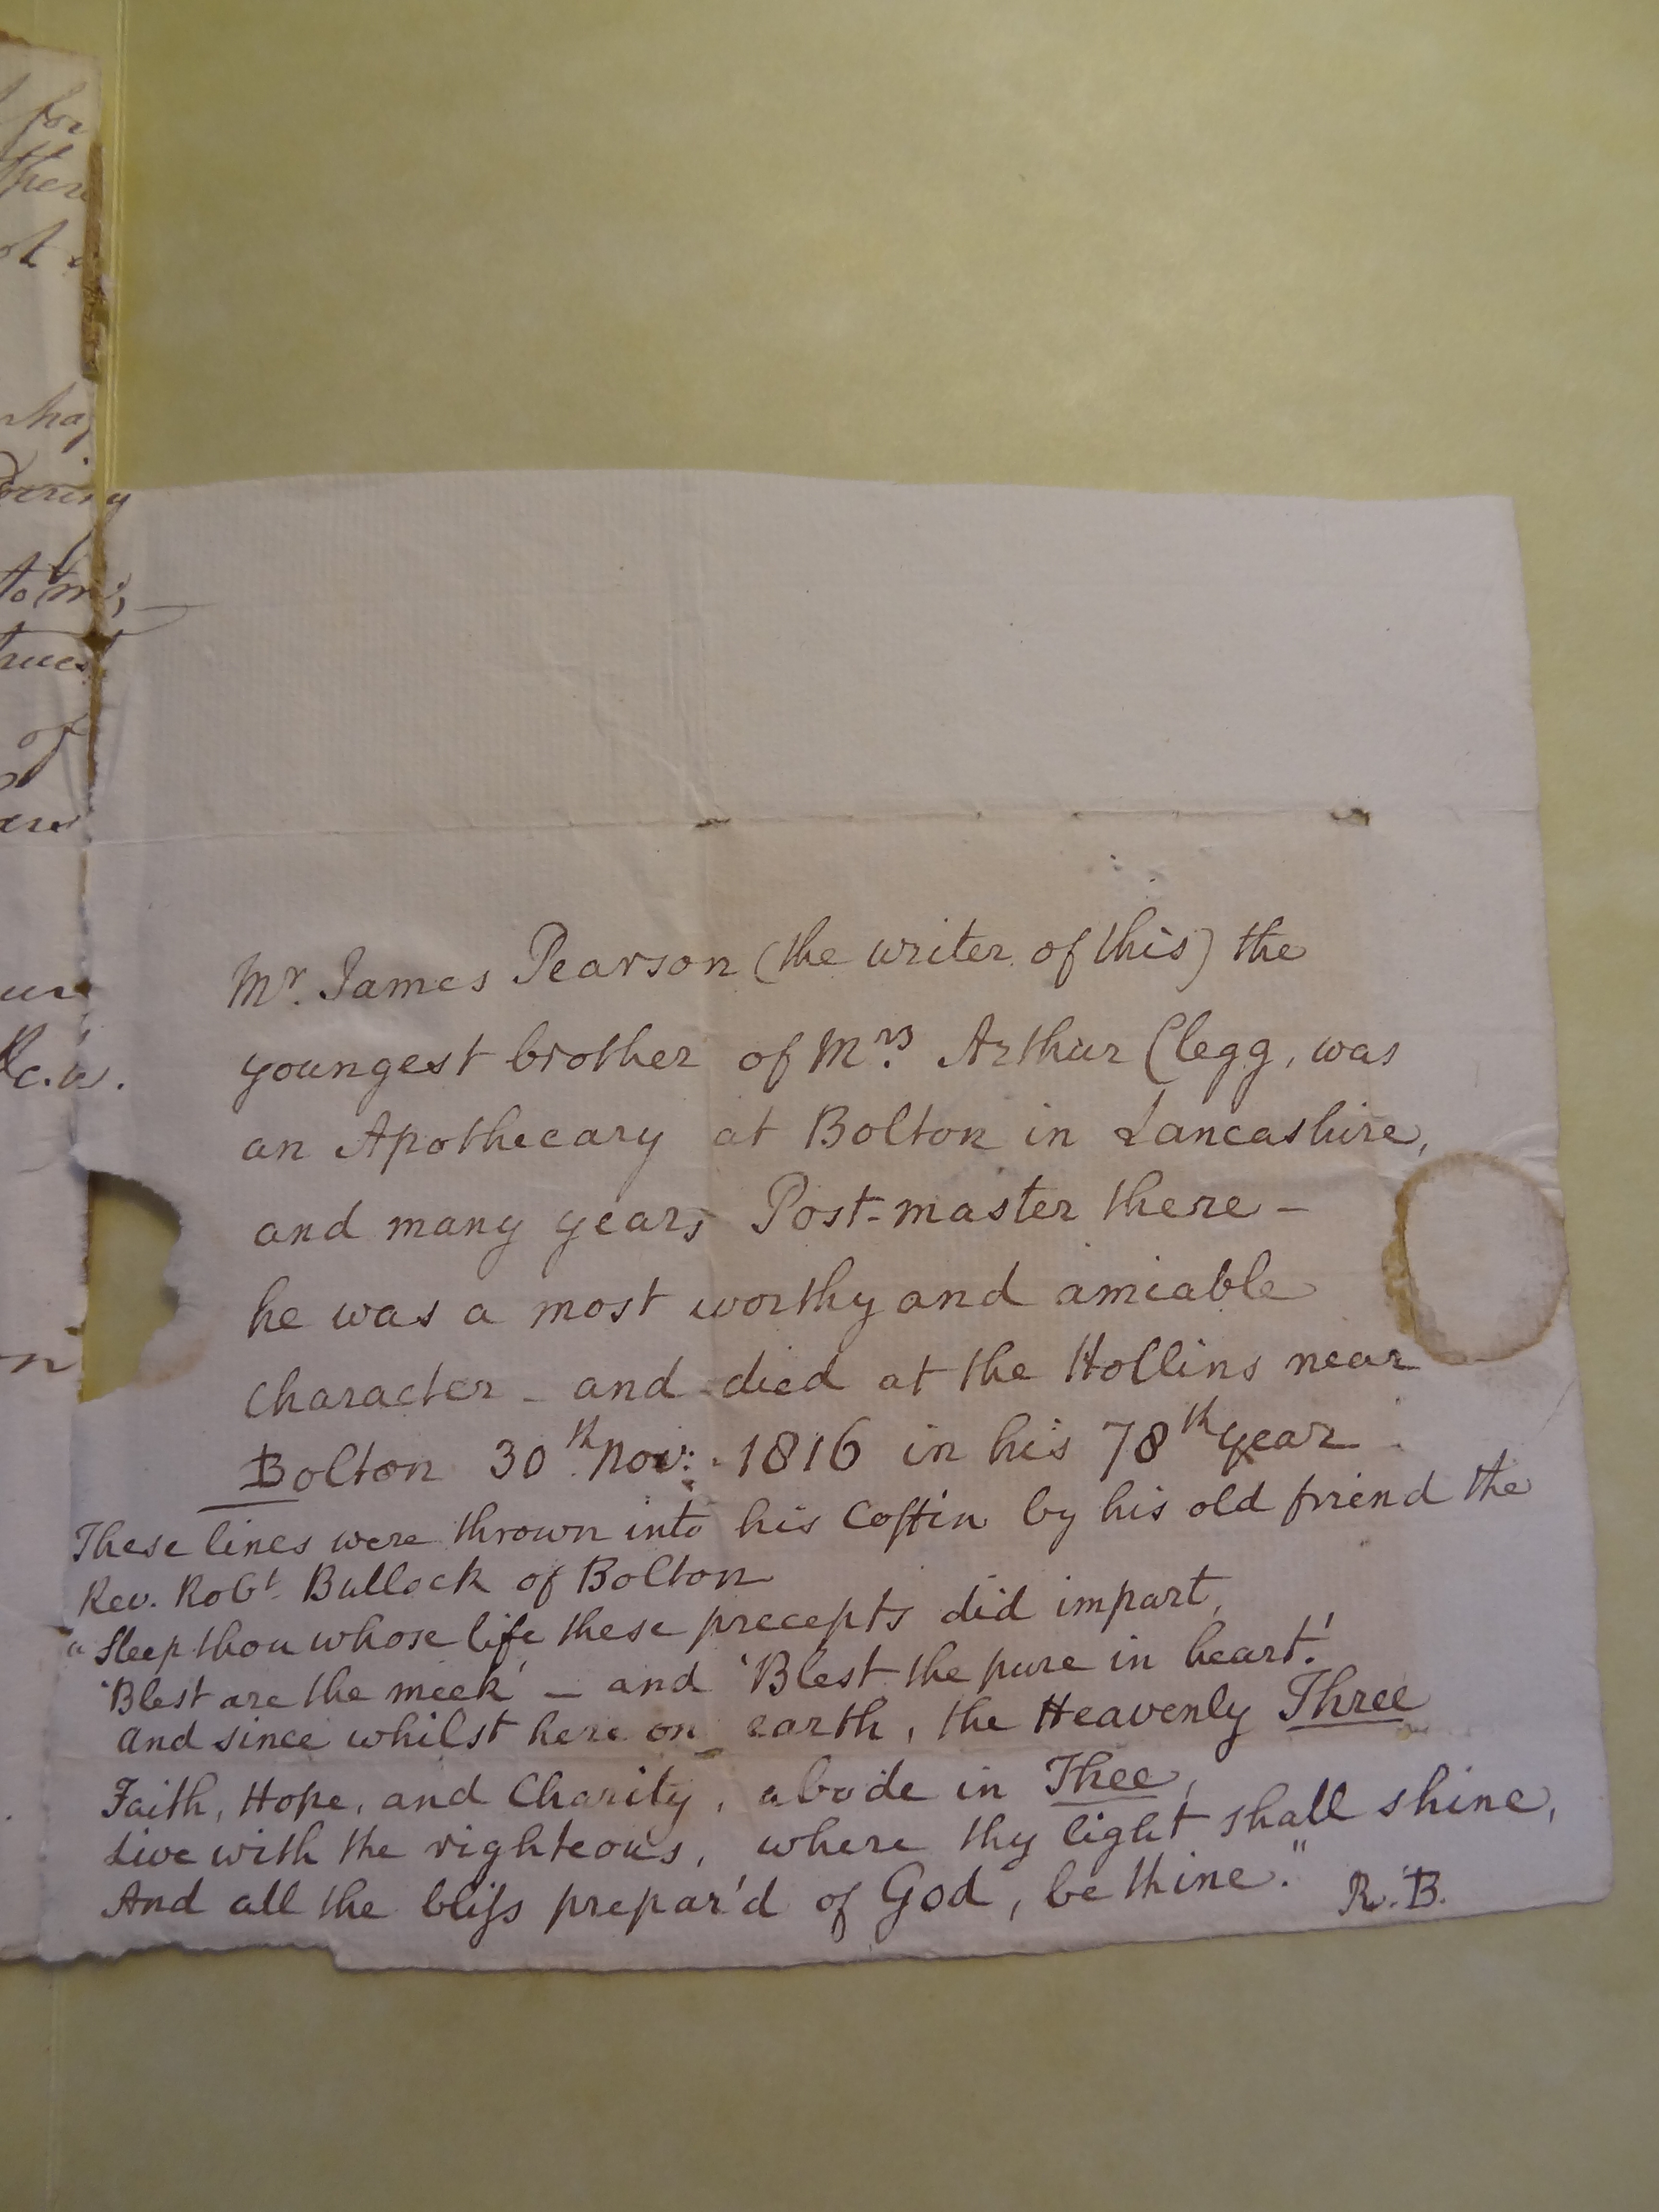 Image #3 of letter: James Pearson to Elizabeth Wilson, 6 July 1786